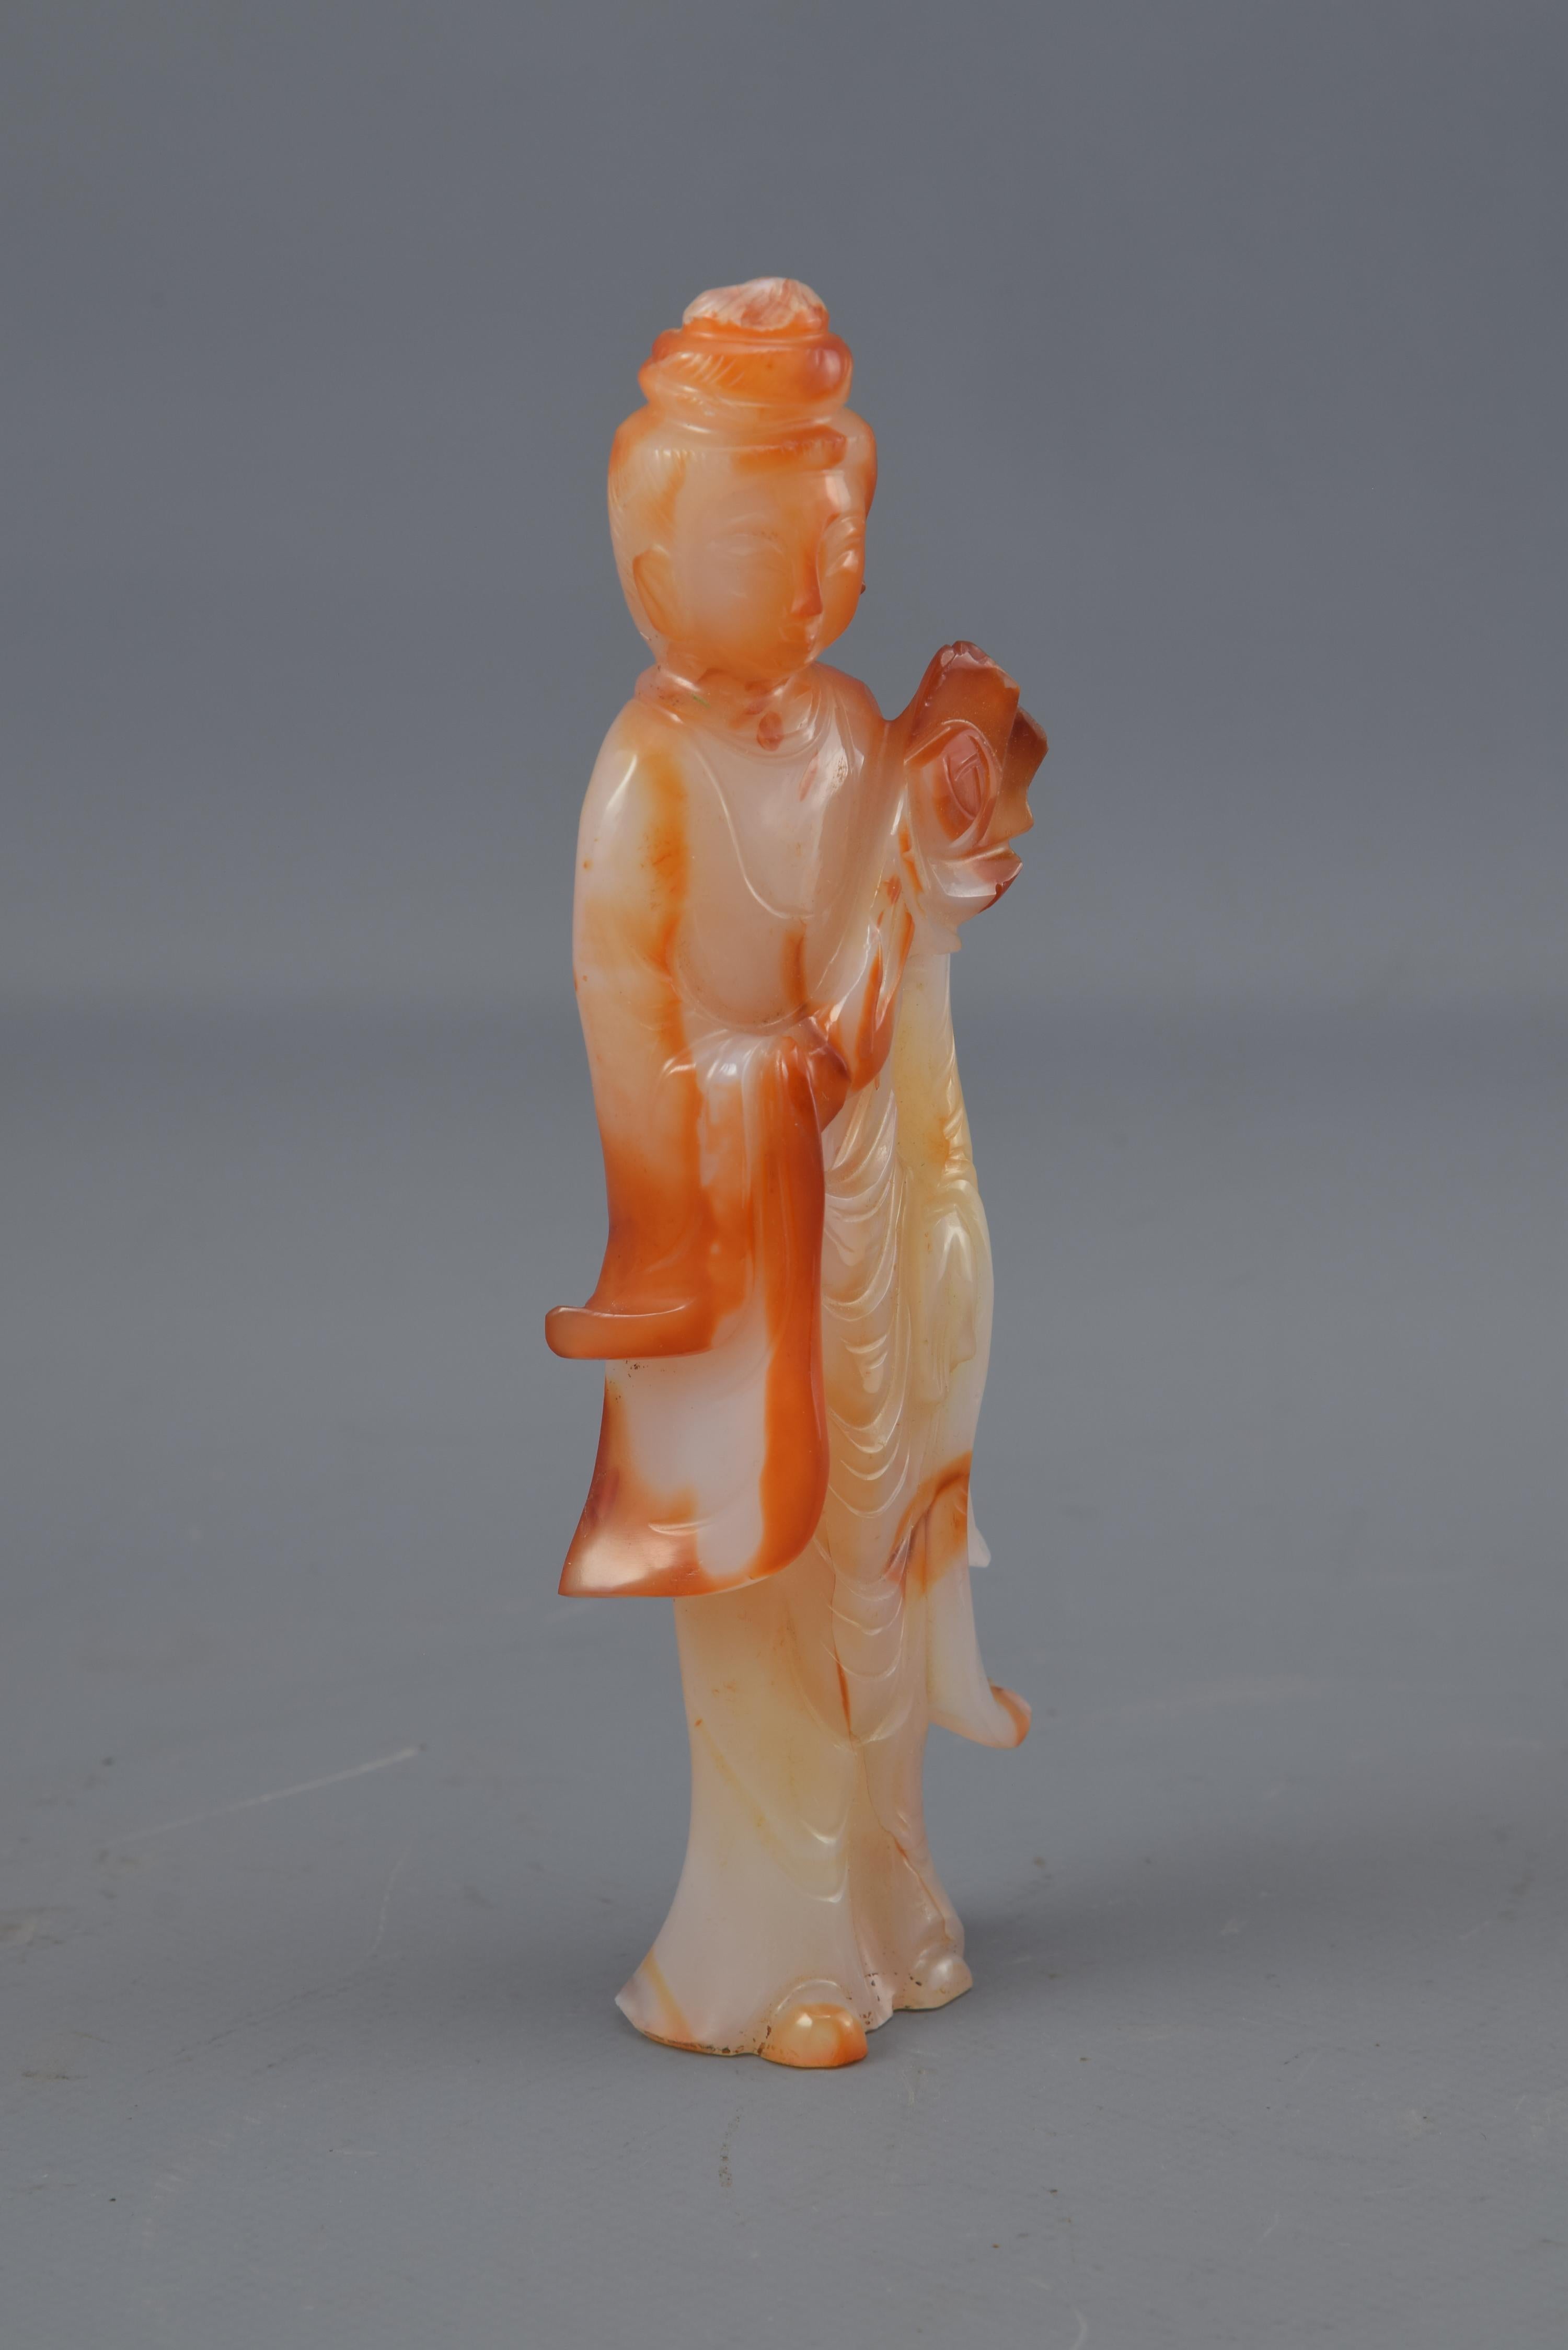 Stylized figure made of hard stone of white and orange colors, with striking tonal variations, that perhaps represents one of the Eight Immortals of the Taoist pantheon, He Xiangu (who is usually shown holding a lotus flower, sometimes also